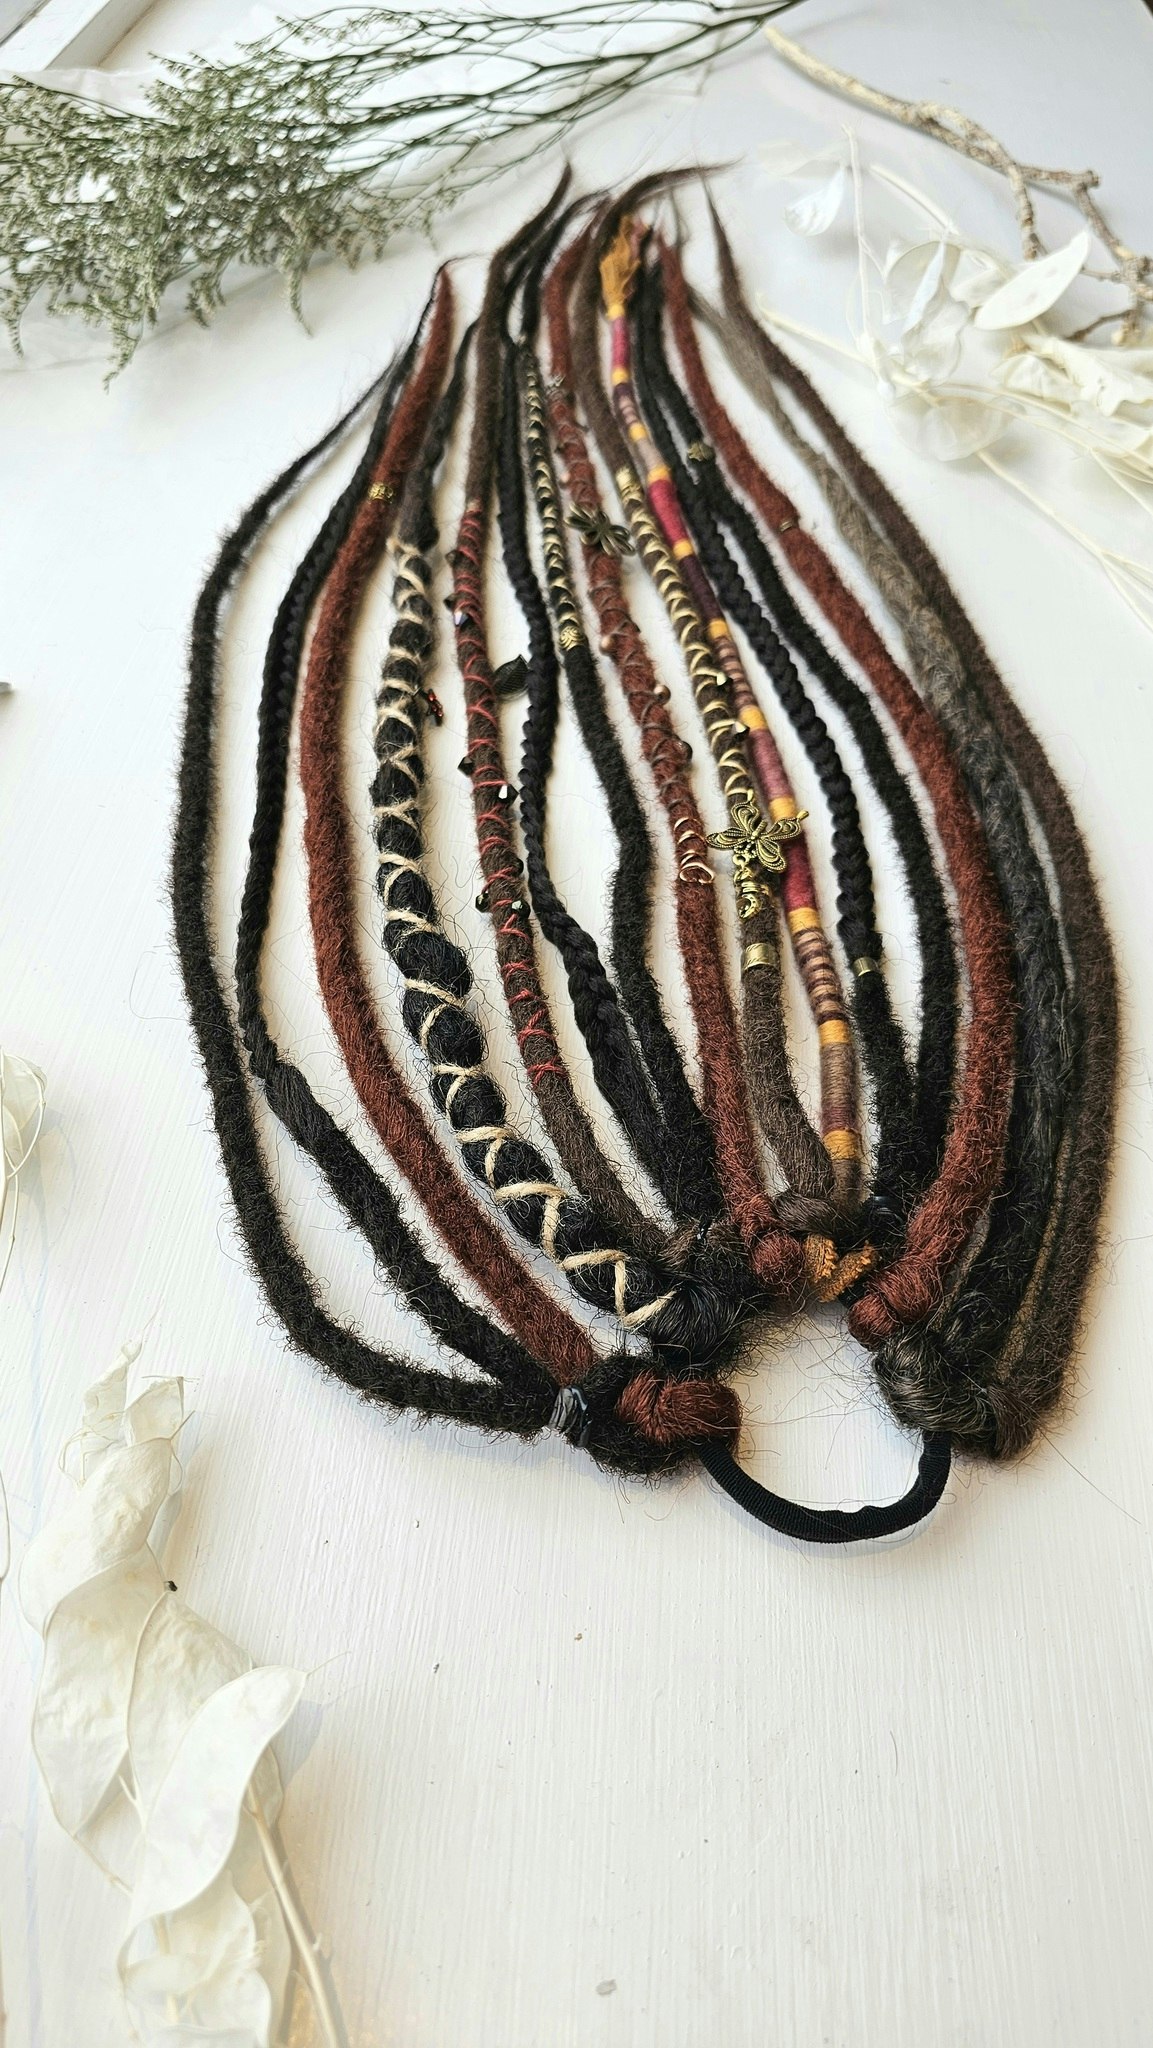 "Paradisäpple" Dreads Ponytail Extensions